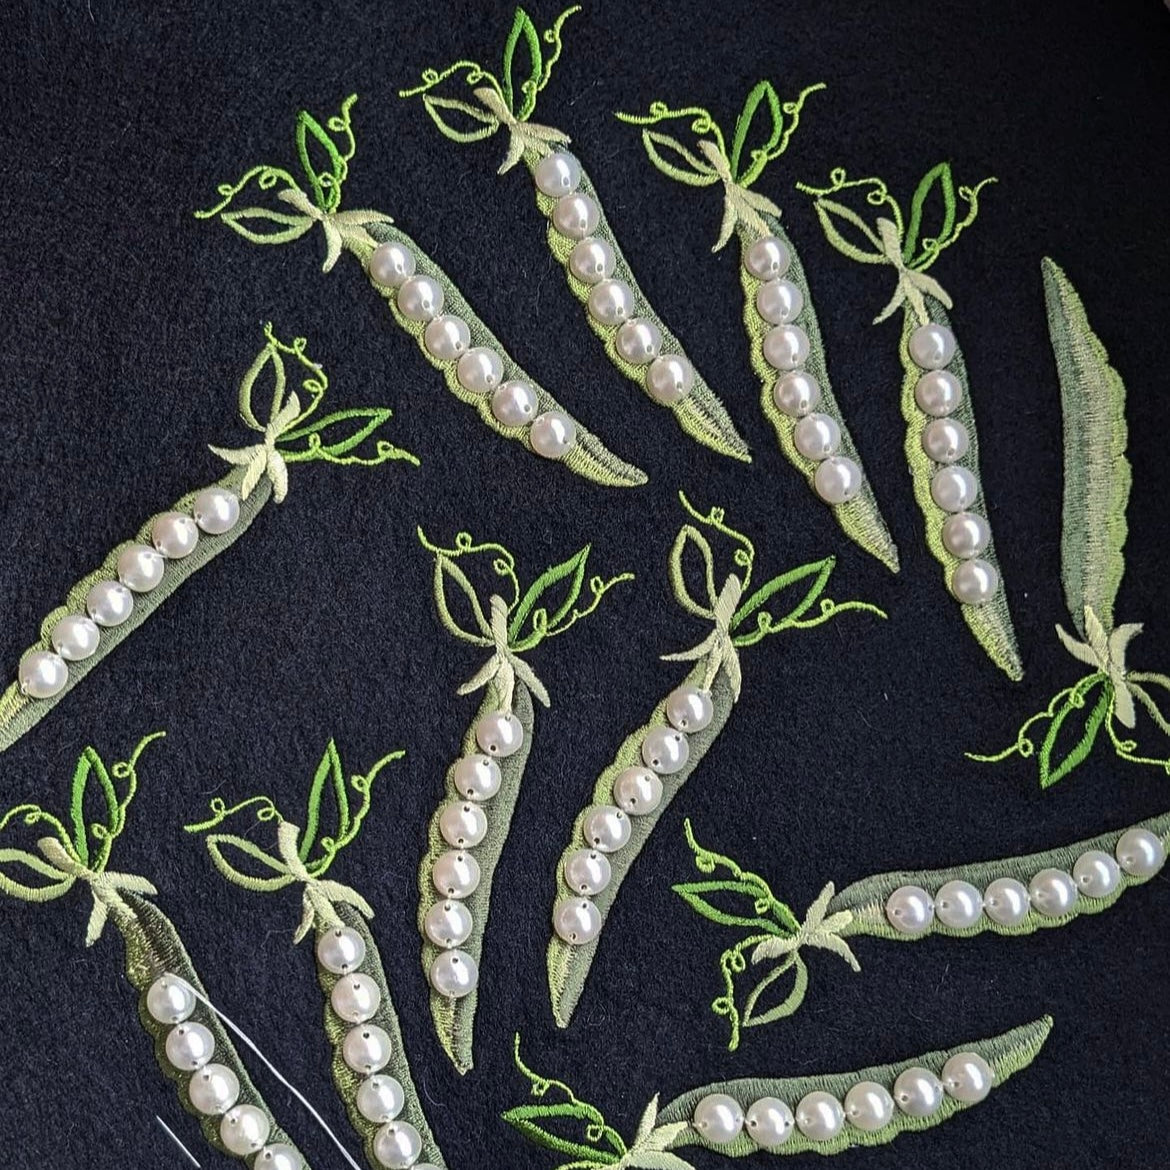 Embroidered pea and pearl patches on black felt before they are finished and cut out